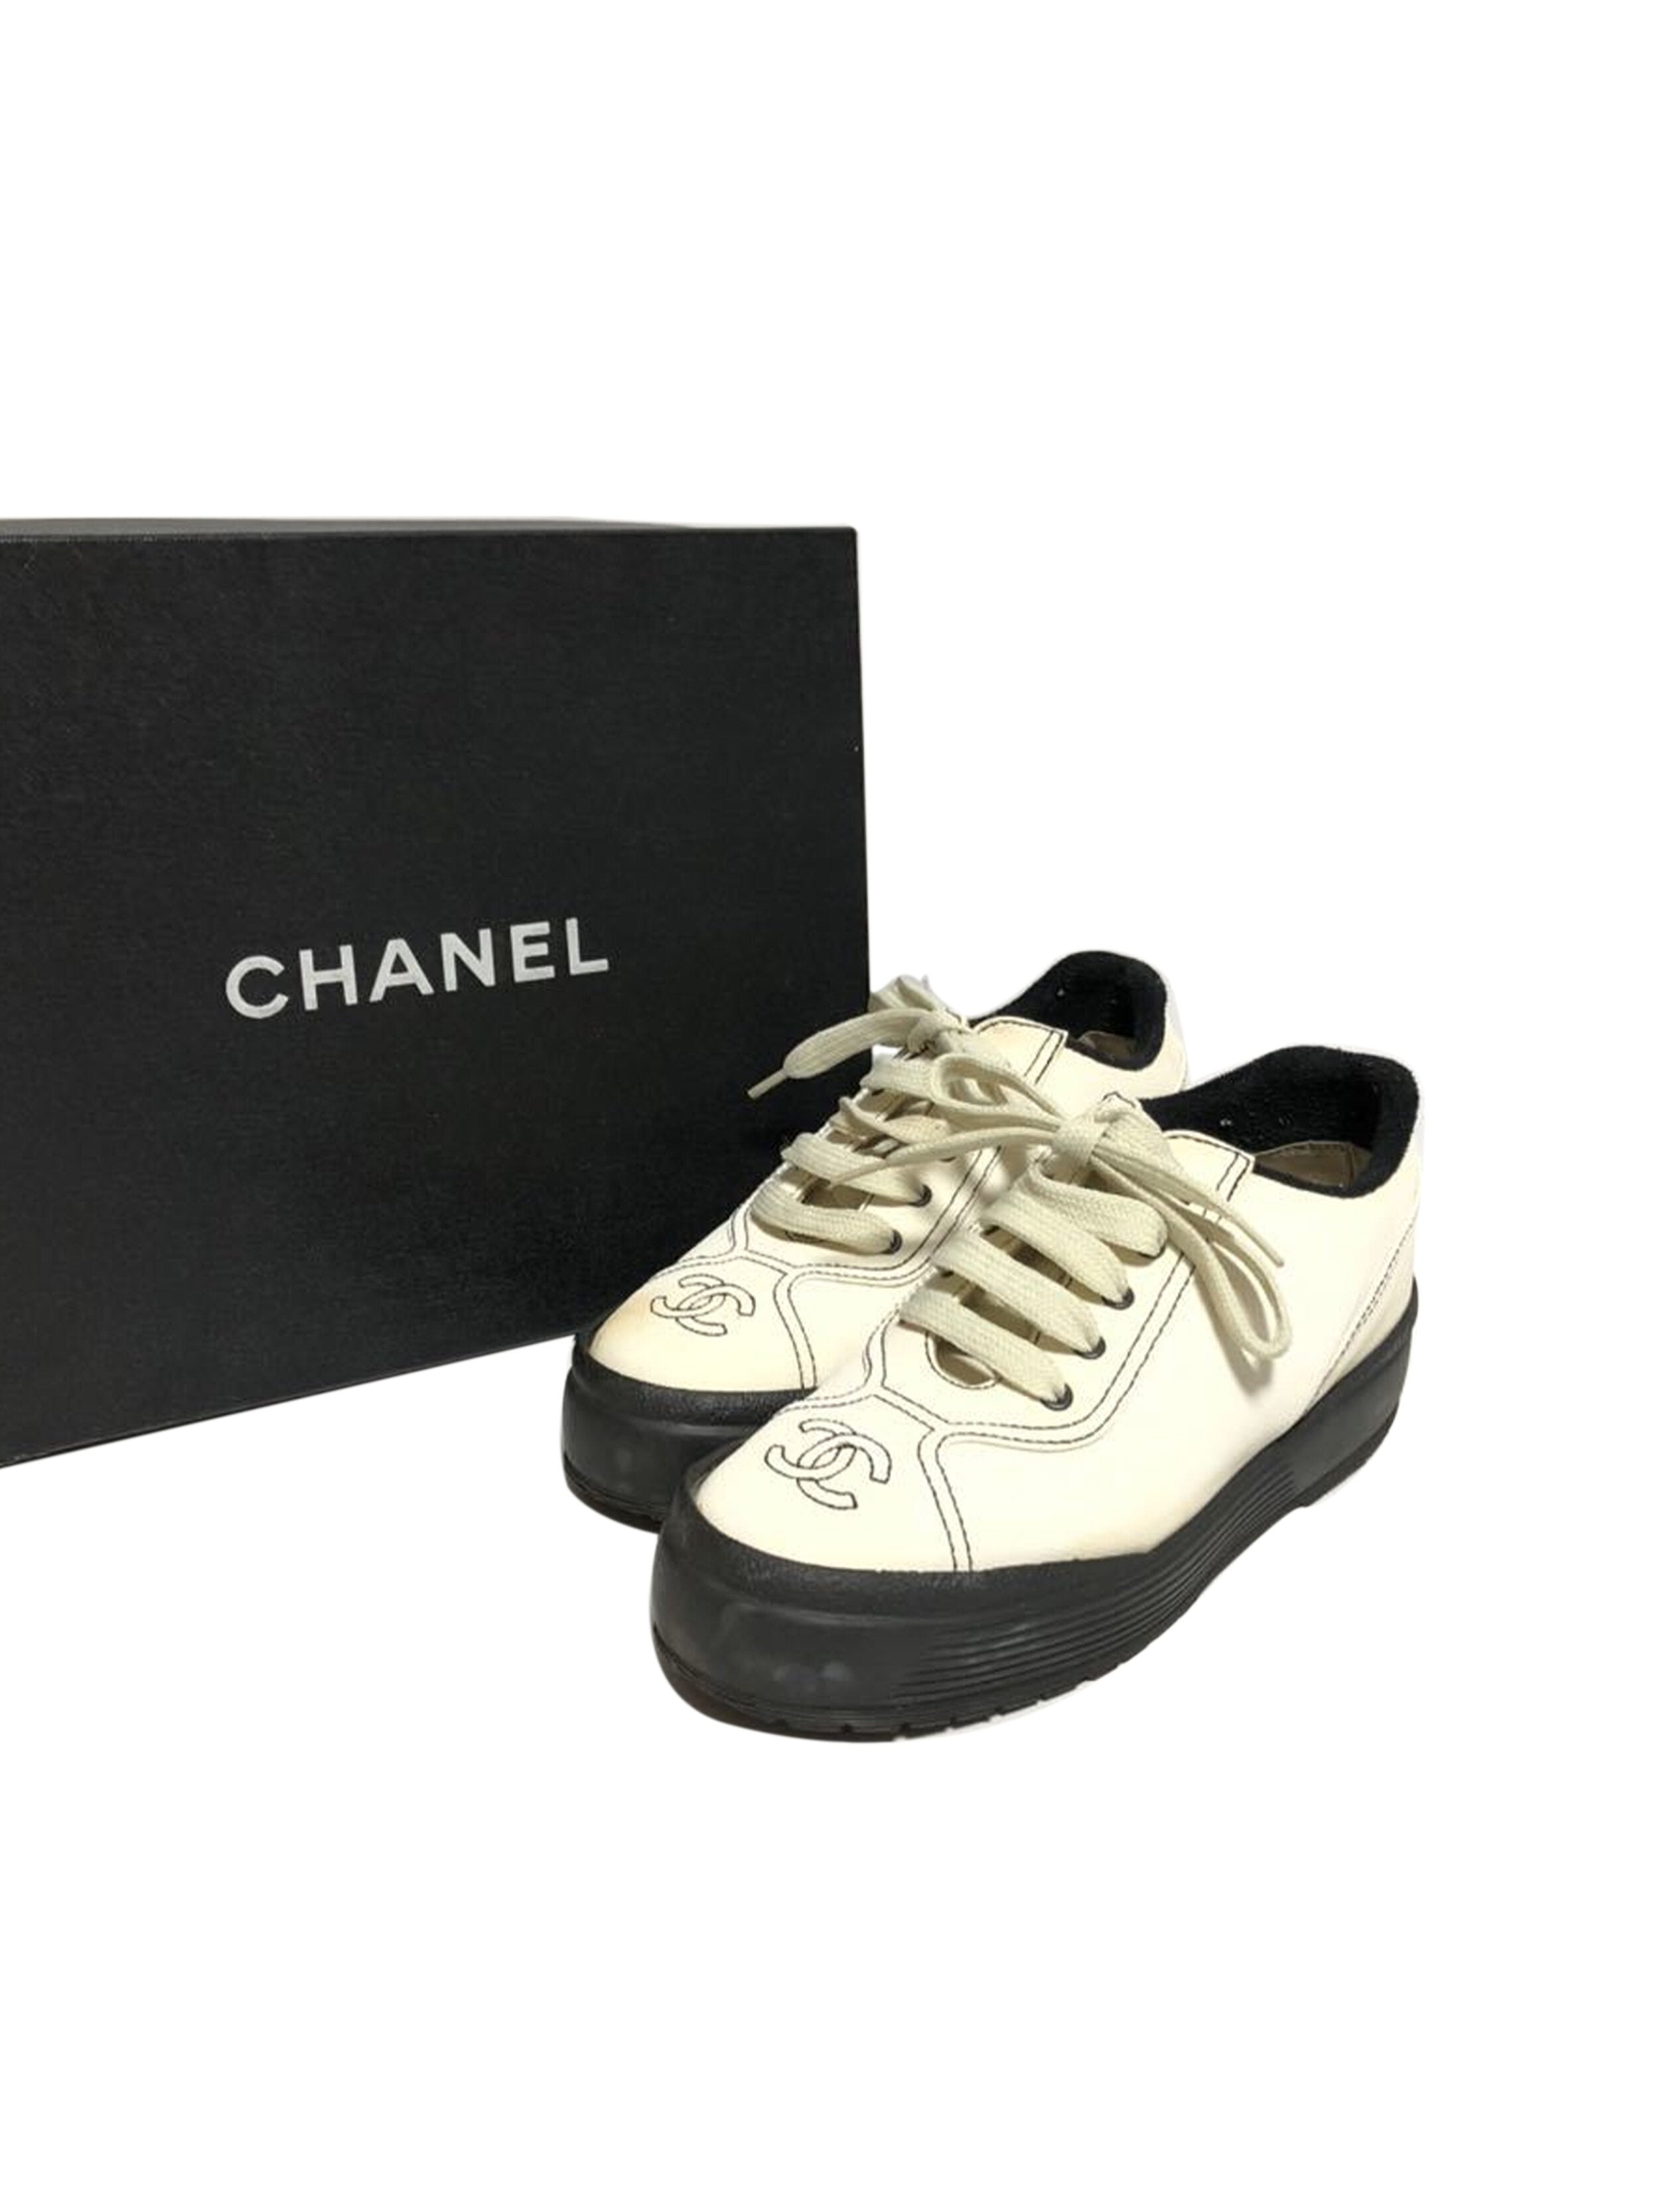 chanel black and white shoes